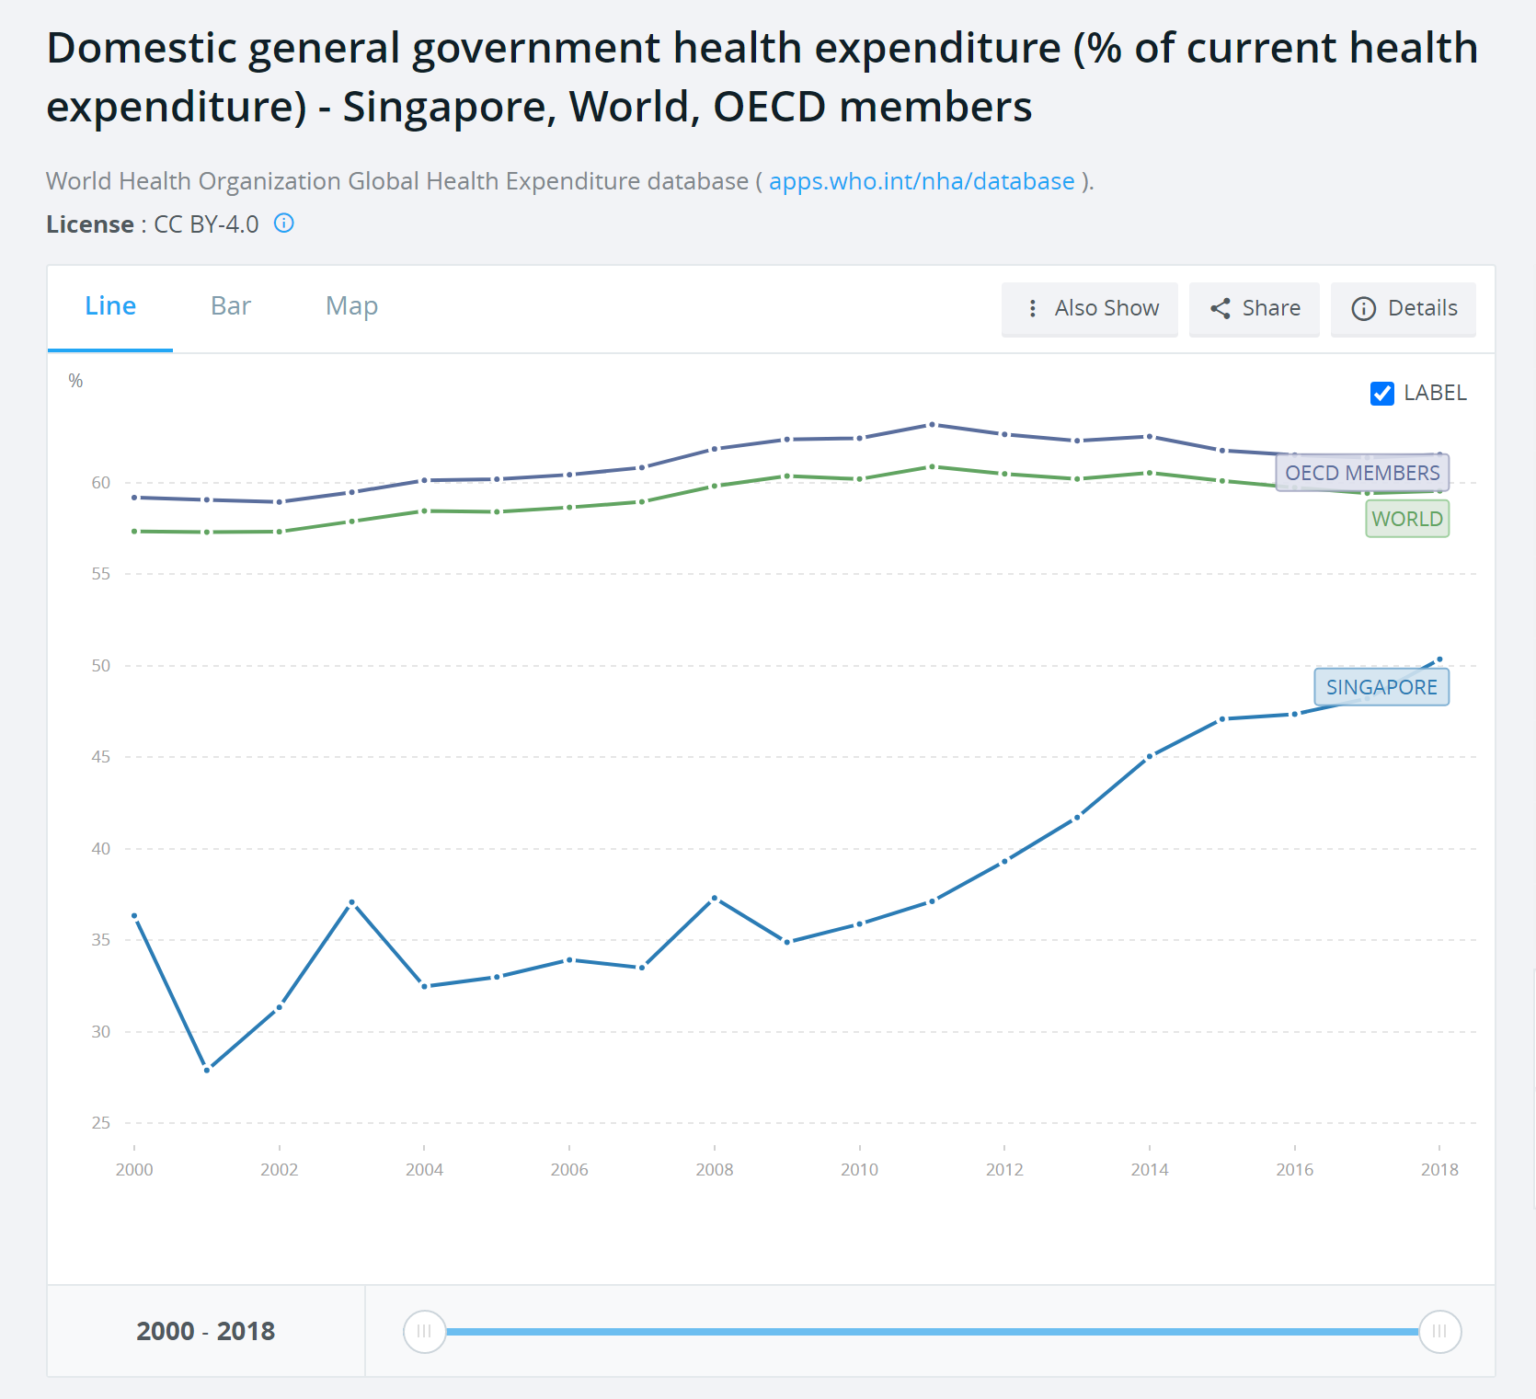 Singapore Health Minister says share of national health expenditure increased to 46% but doesn’t say it’s far below OECD’s average.